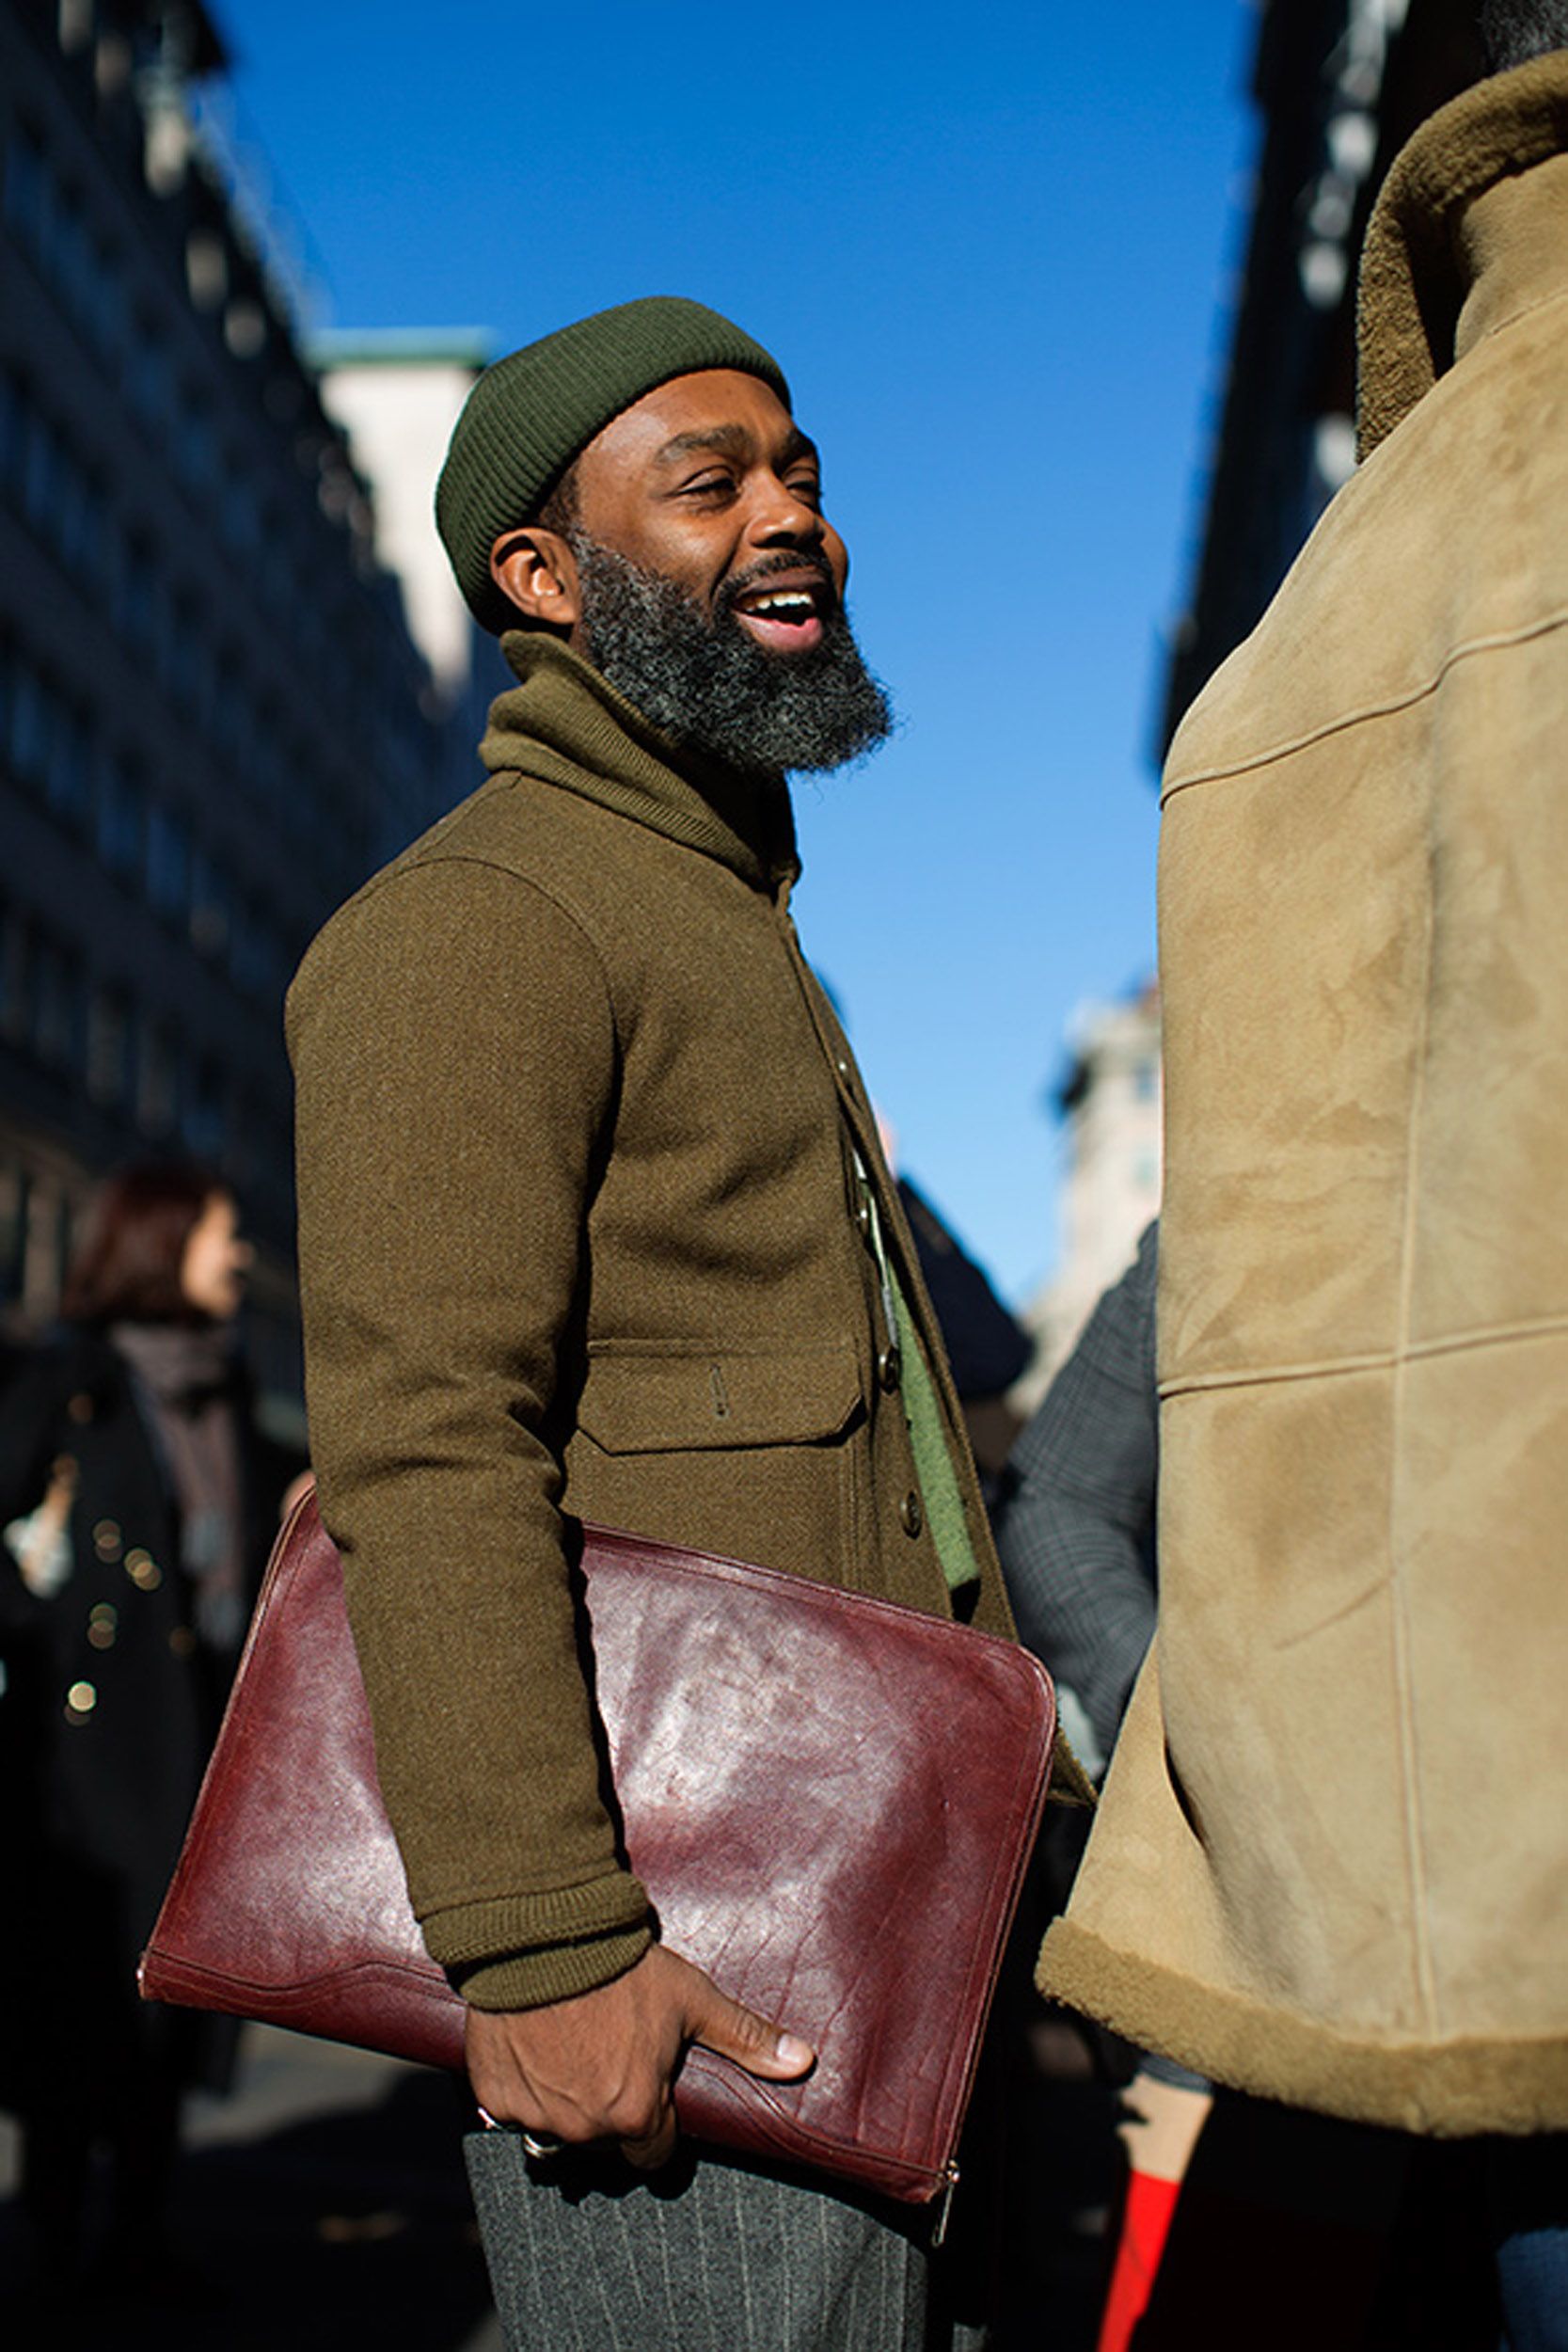 Want his man bag.  Sartorialist, Well dressed men, Street style bags